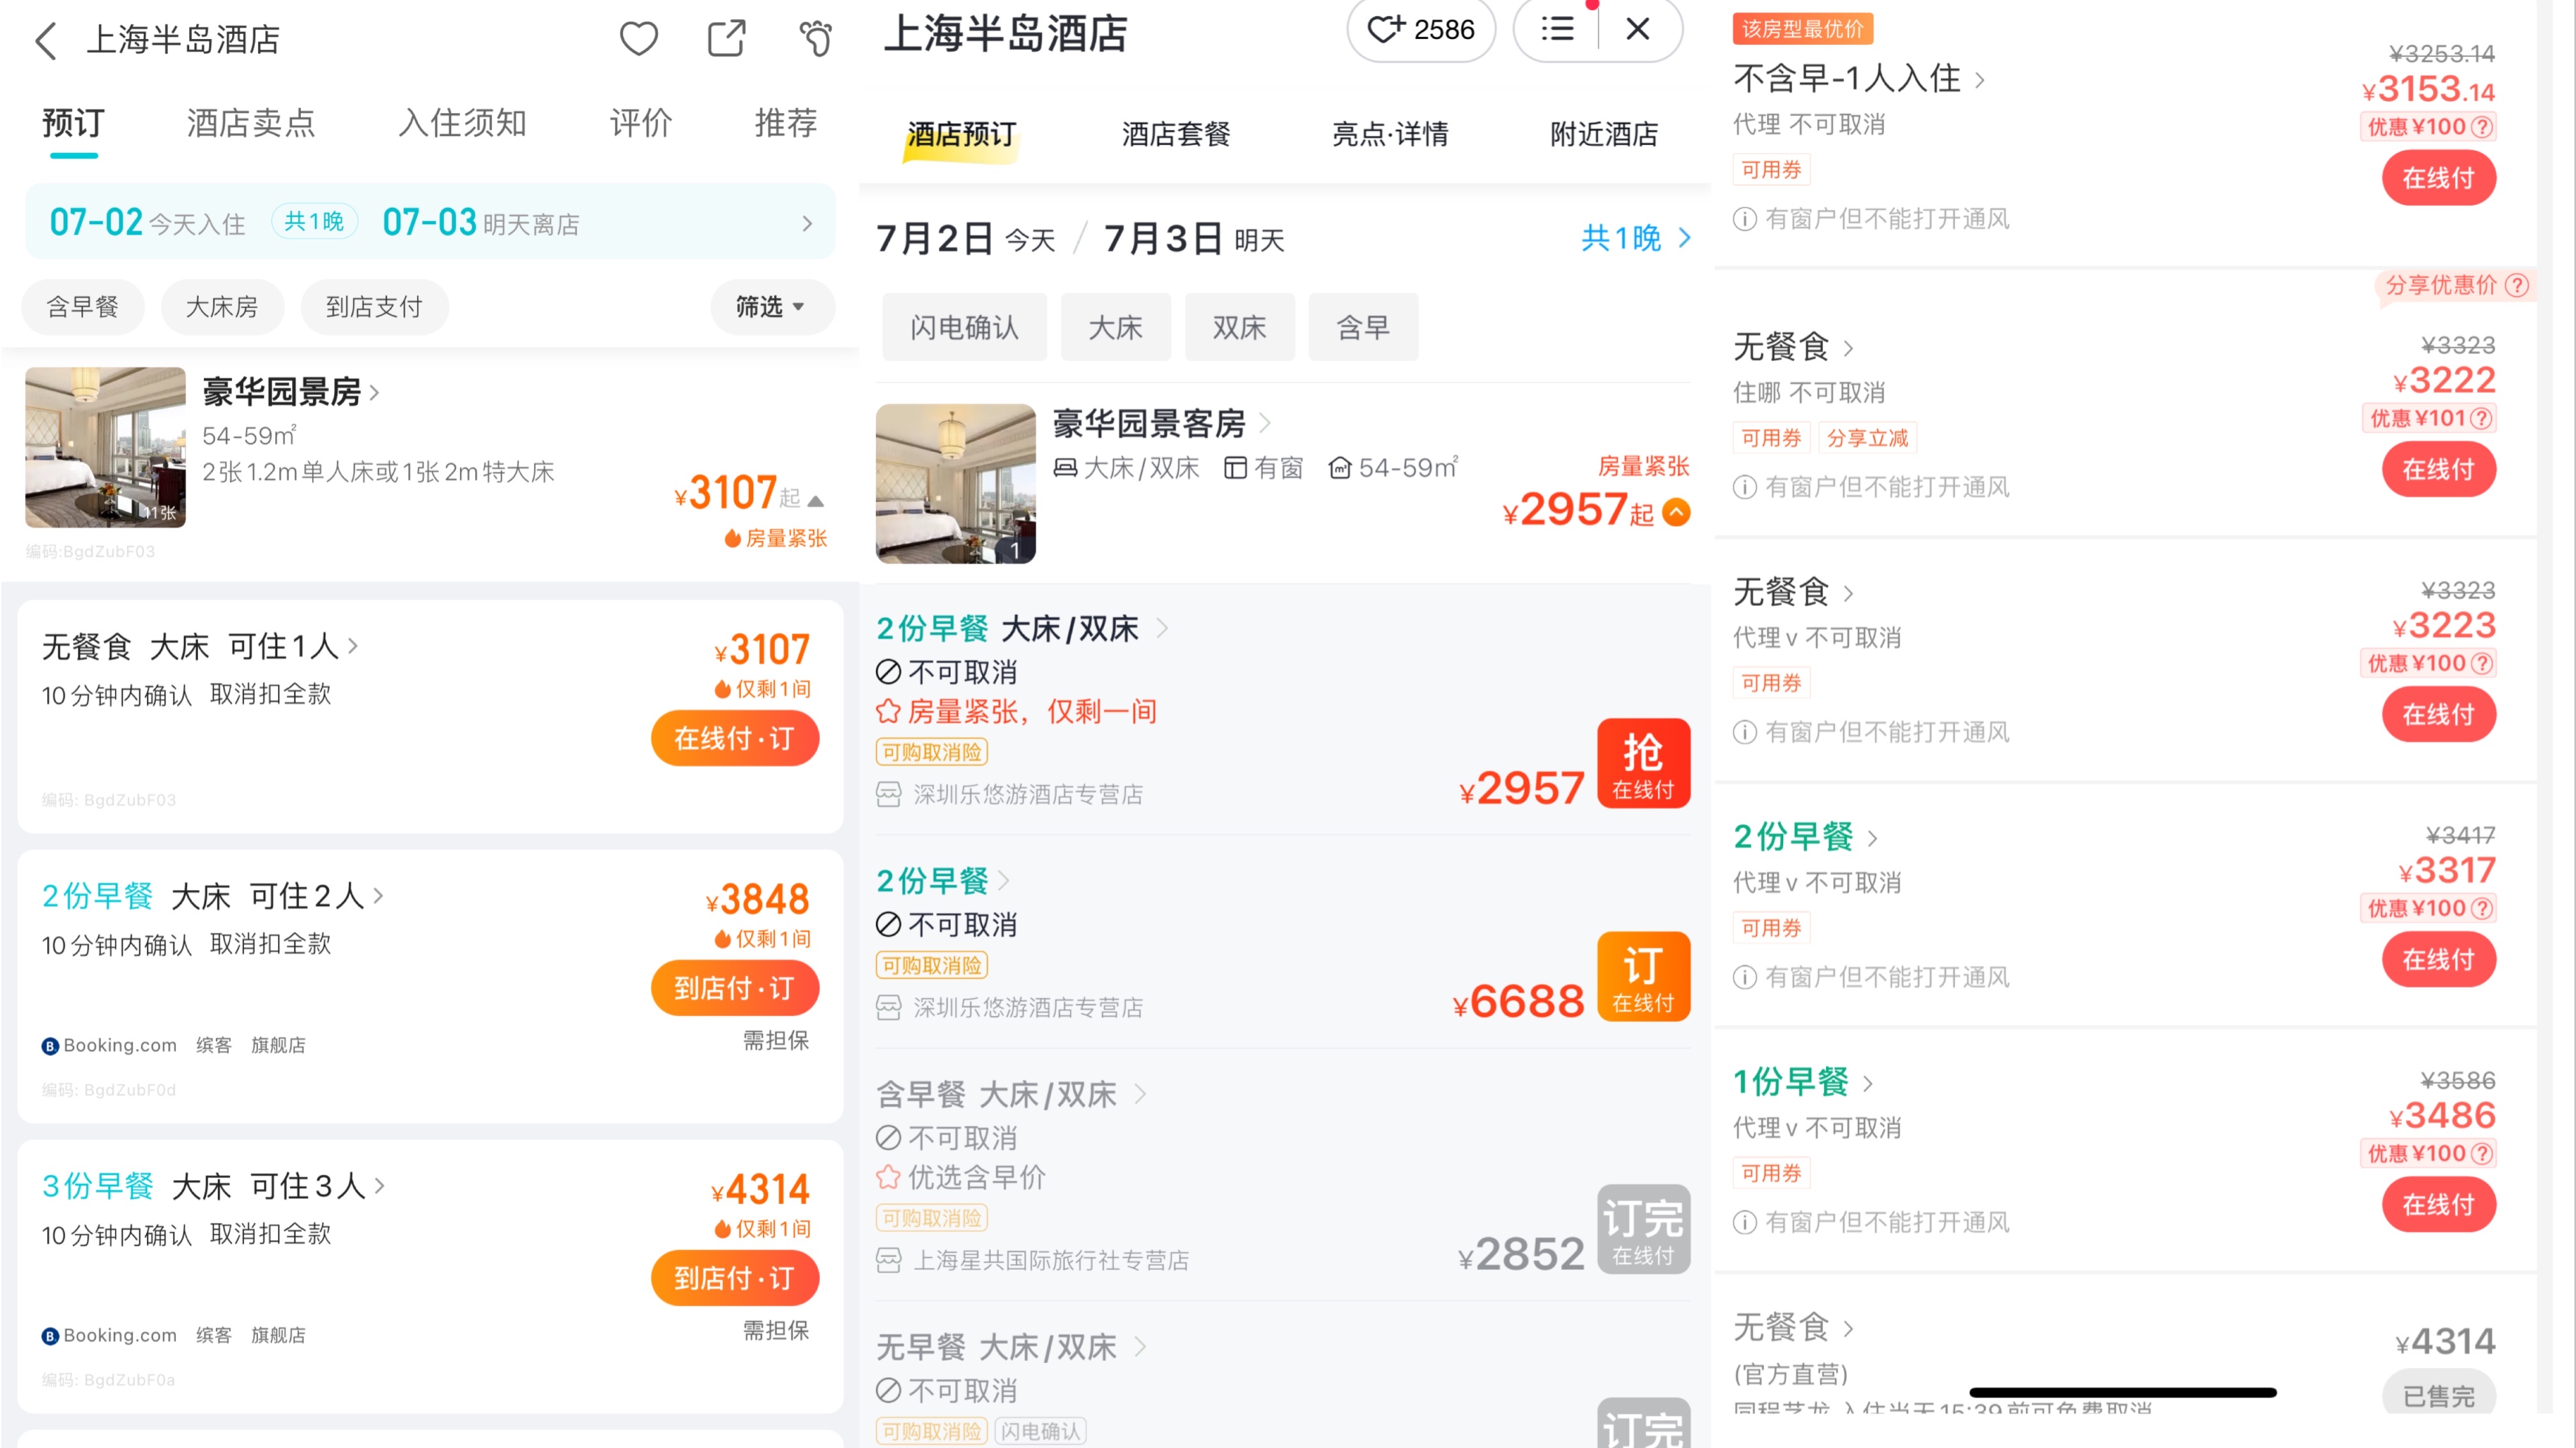 A screenshot of the reservation price of a luxury garden-view room at The Peninsula Hotel in Shanghai displayed on the afternoon of July 2, from left to right: Where to Go, Flying Pig, and the same journey.